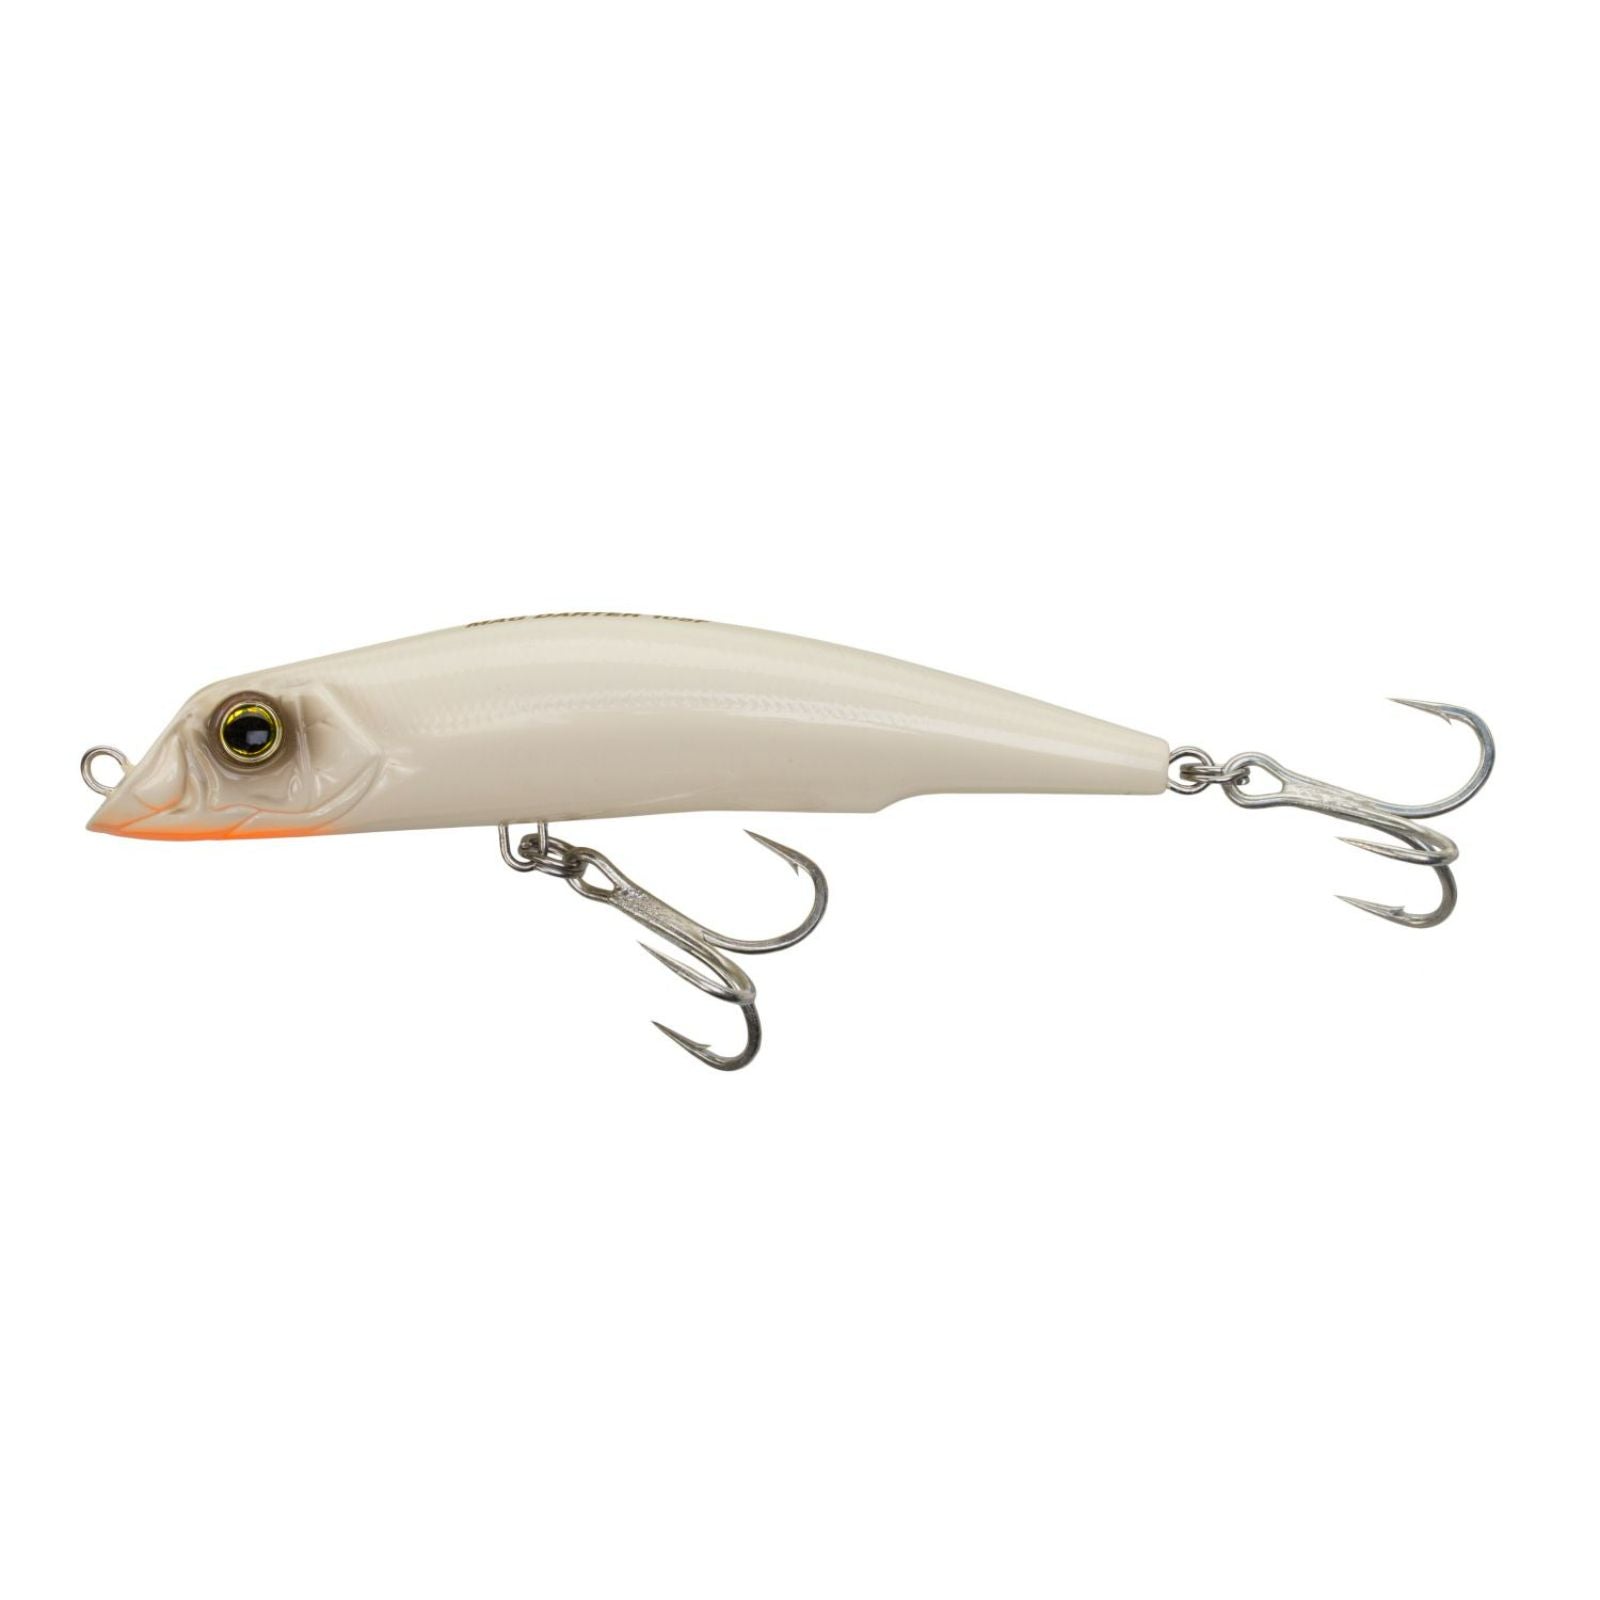 Bone 165mm 6.50inch Yo-Zuri Mag Darter F Lures from Fish On Outlet